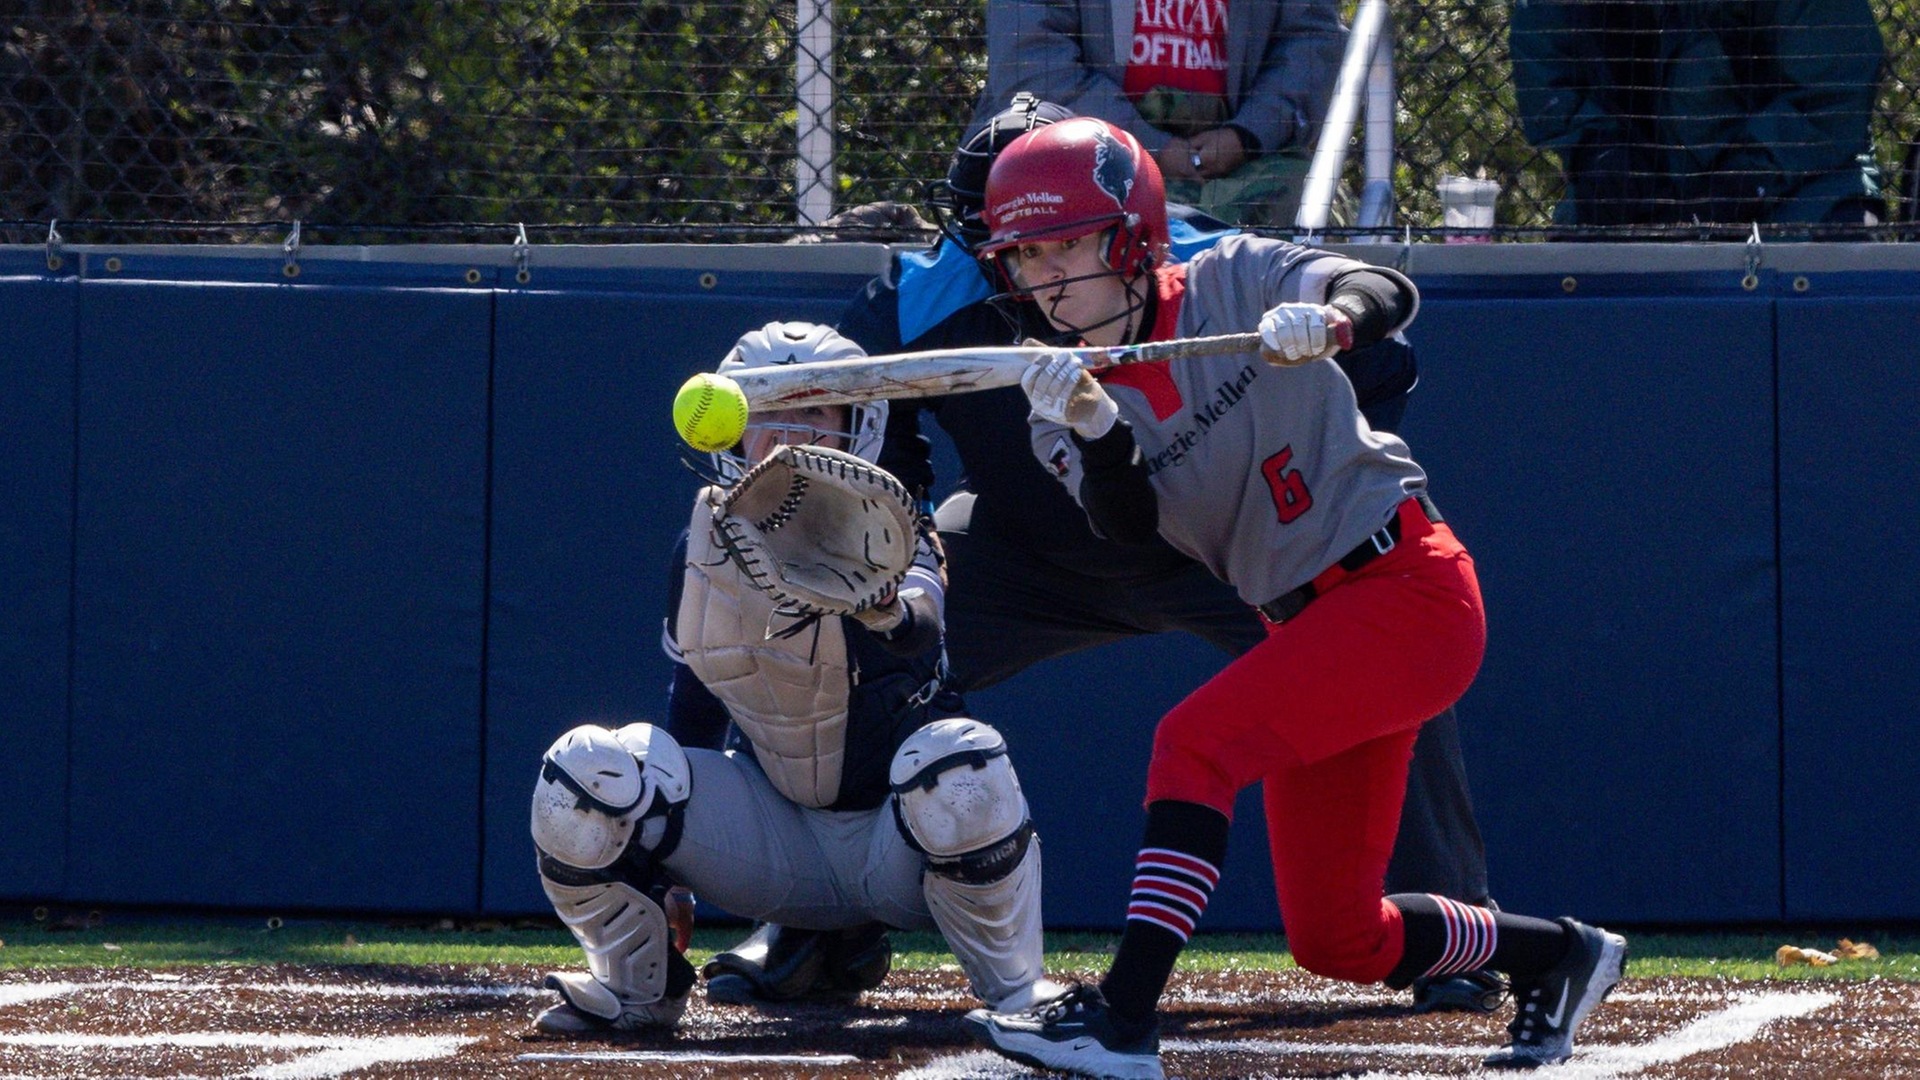 women's softball player wearing gray jersey with red pants looks to bunt the ball